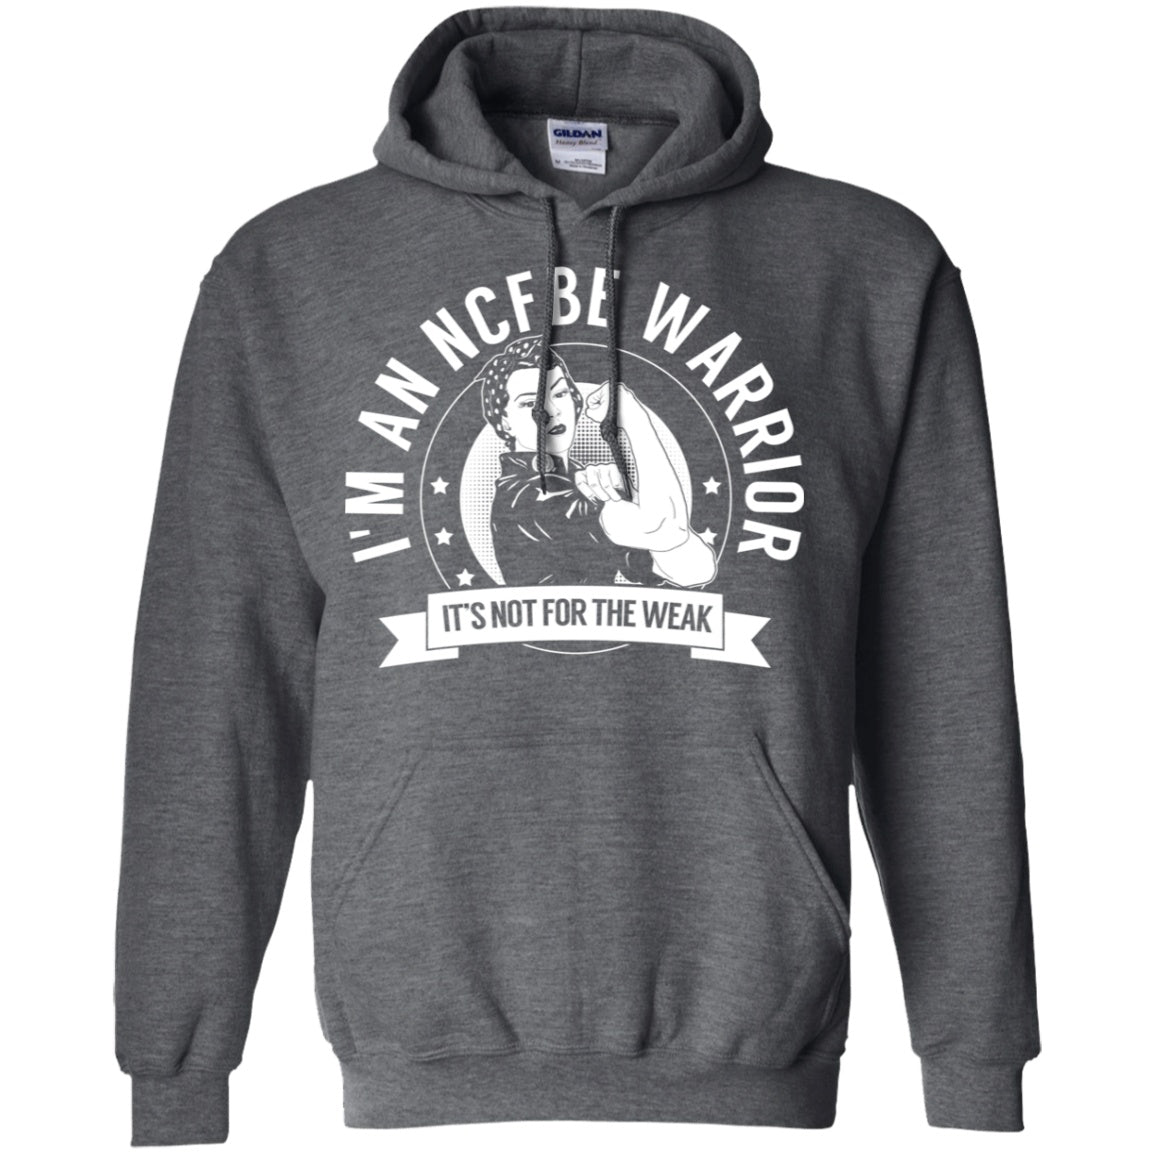 Non-cystic fibrosis bronchiectasis -  NCFBE Warrior NFTW Pullover Hoodie 8 oz. - The Unchargeables